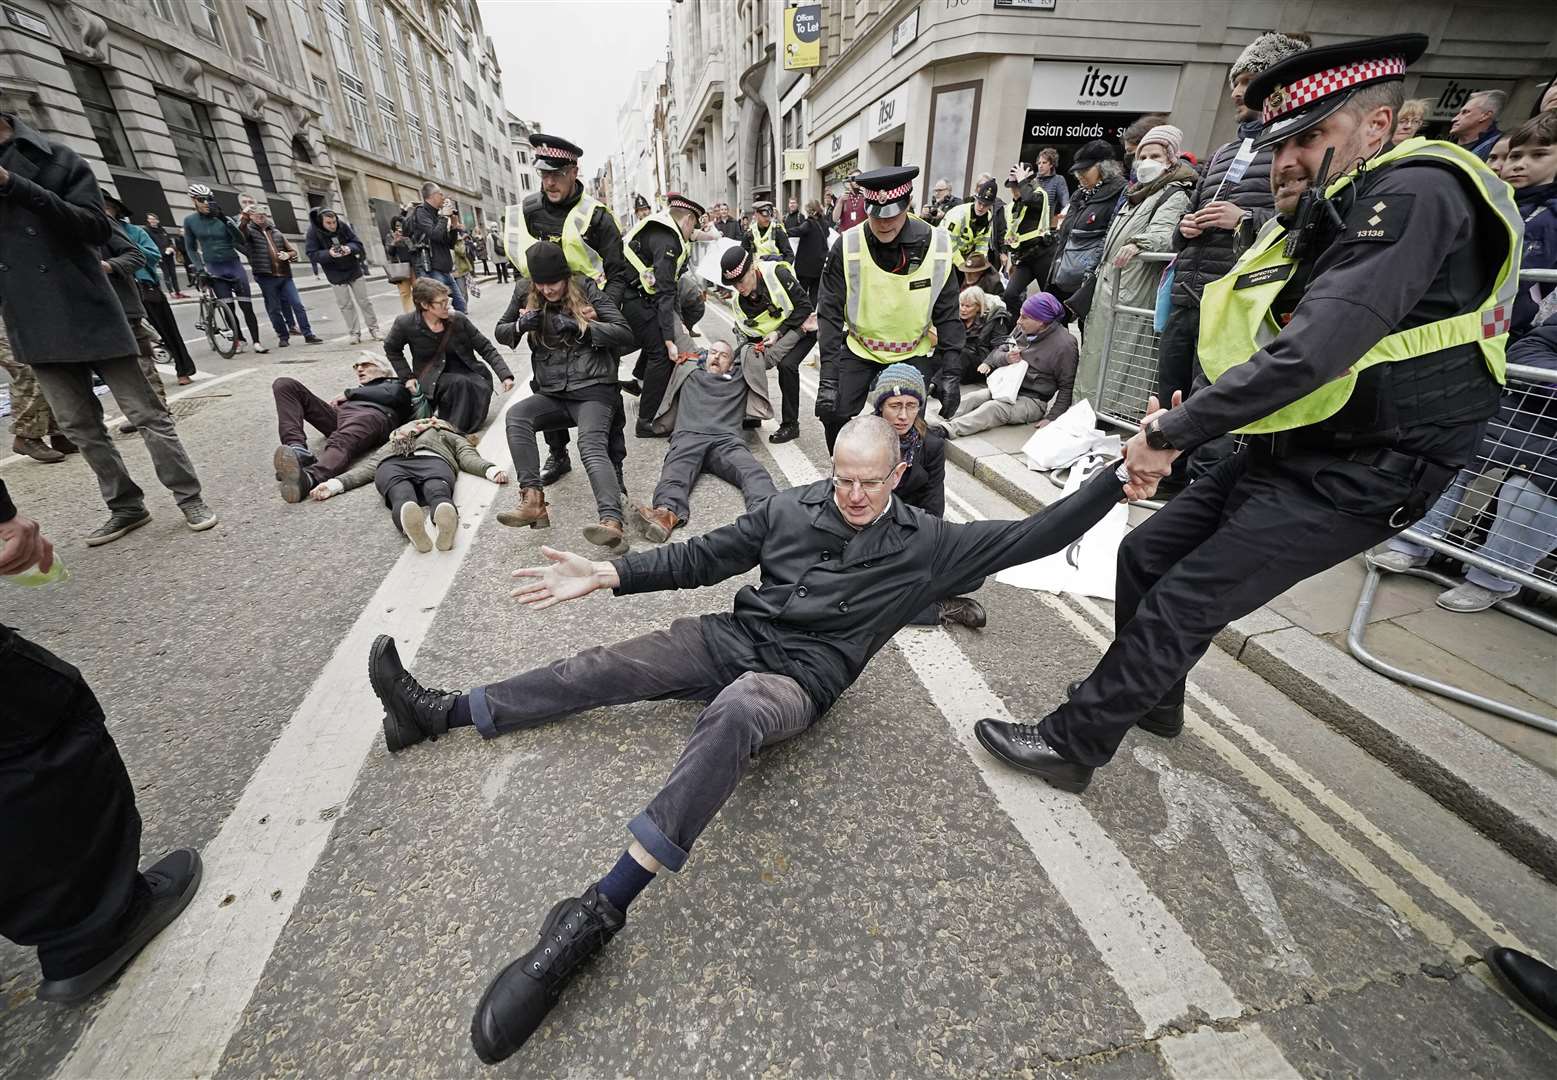 The Queen’s Speech will set out plans to crack down on disruptive protests (Aaron Chown/PA)